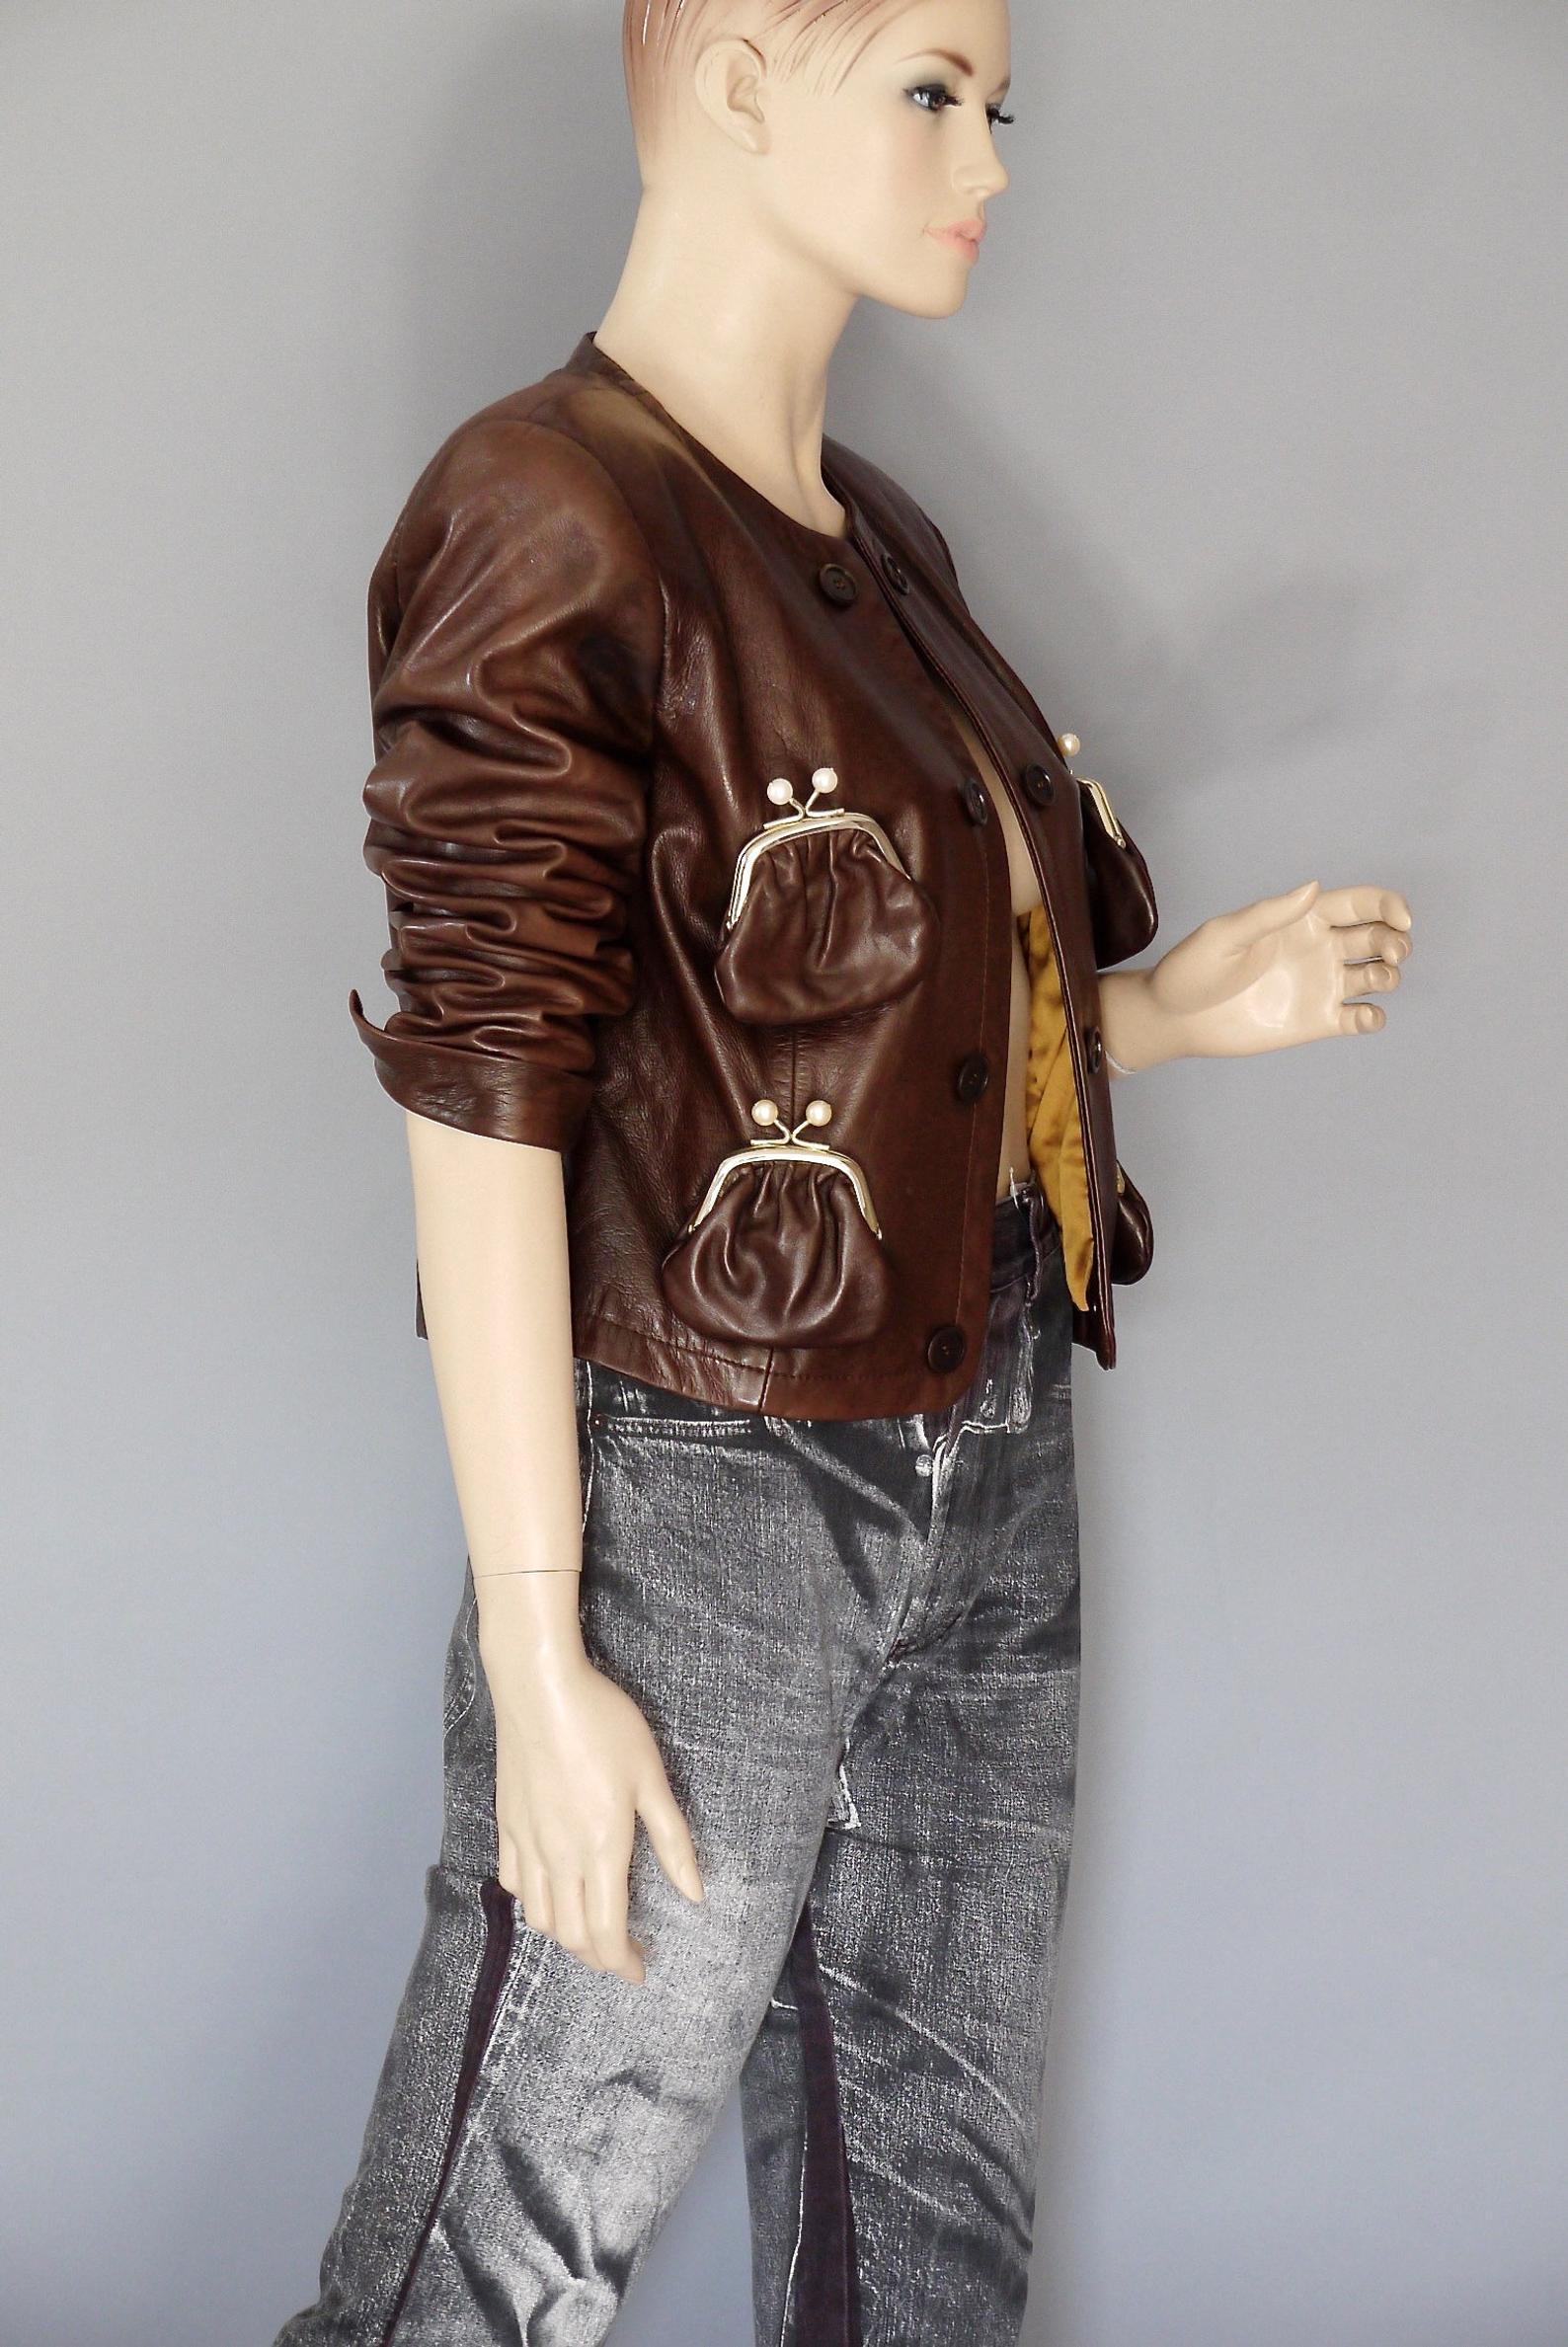 Vintage MOSCHINO Cheap and Chic Purse Kiss Lock Pocket Leather Jacket

Measurements taken laid flat, please double bust and waist:
Shoulder: 16.53 inches (42 cm)
Sleeves: 20.47 inches (52 cm)
Bust: 18.11 inches (46 cm)
Waist: 16.33 inches (41.5